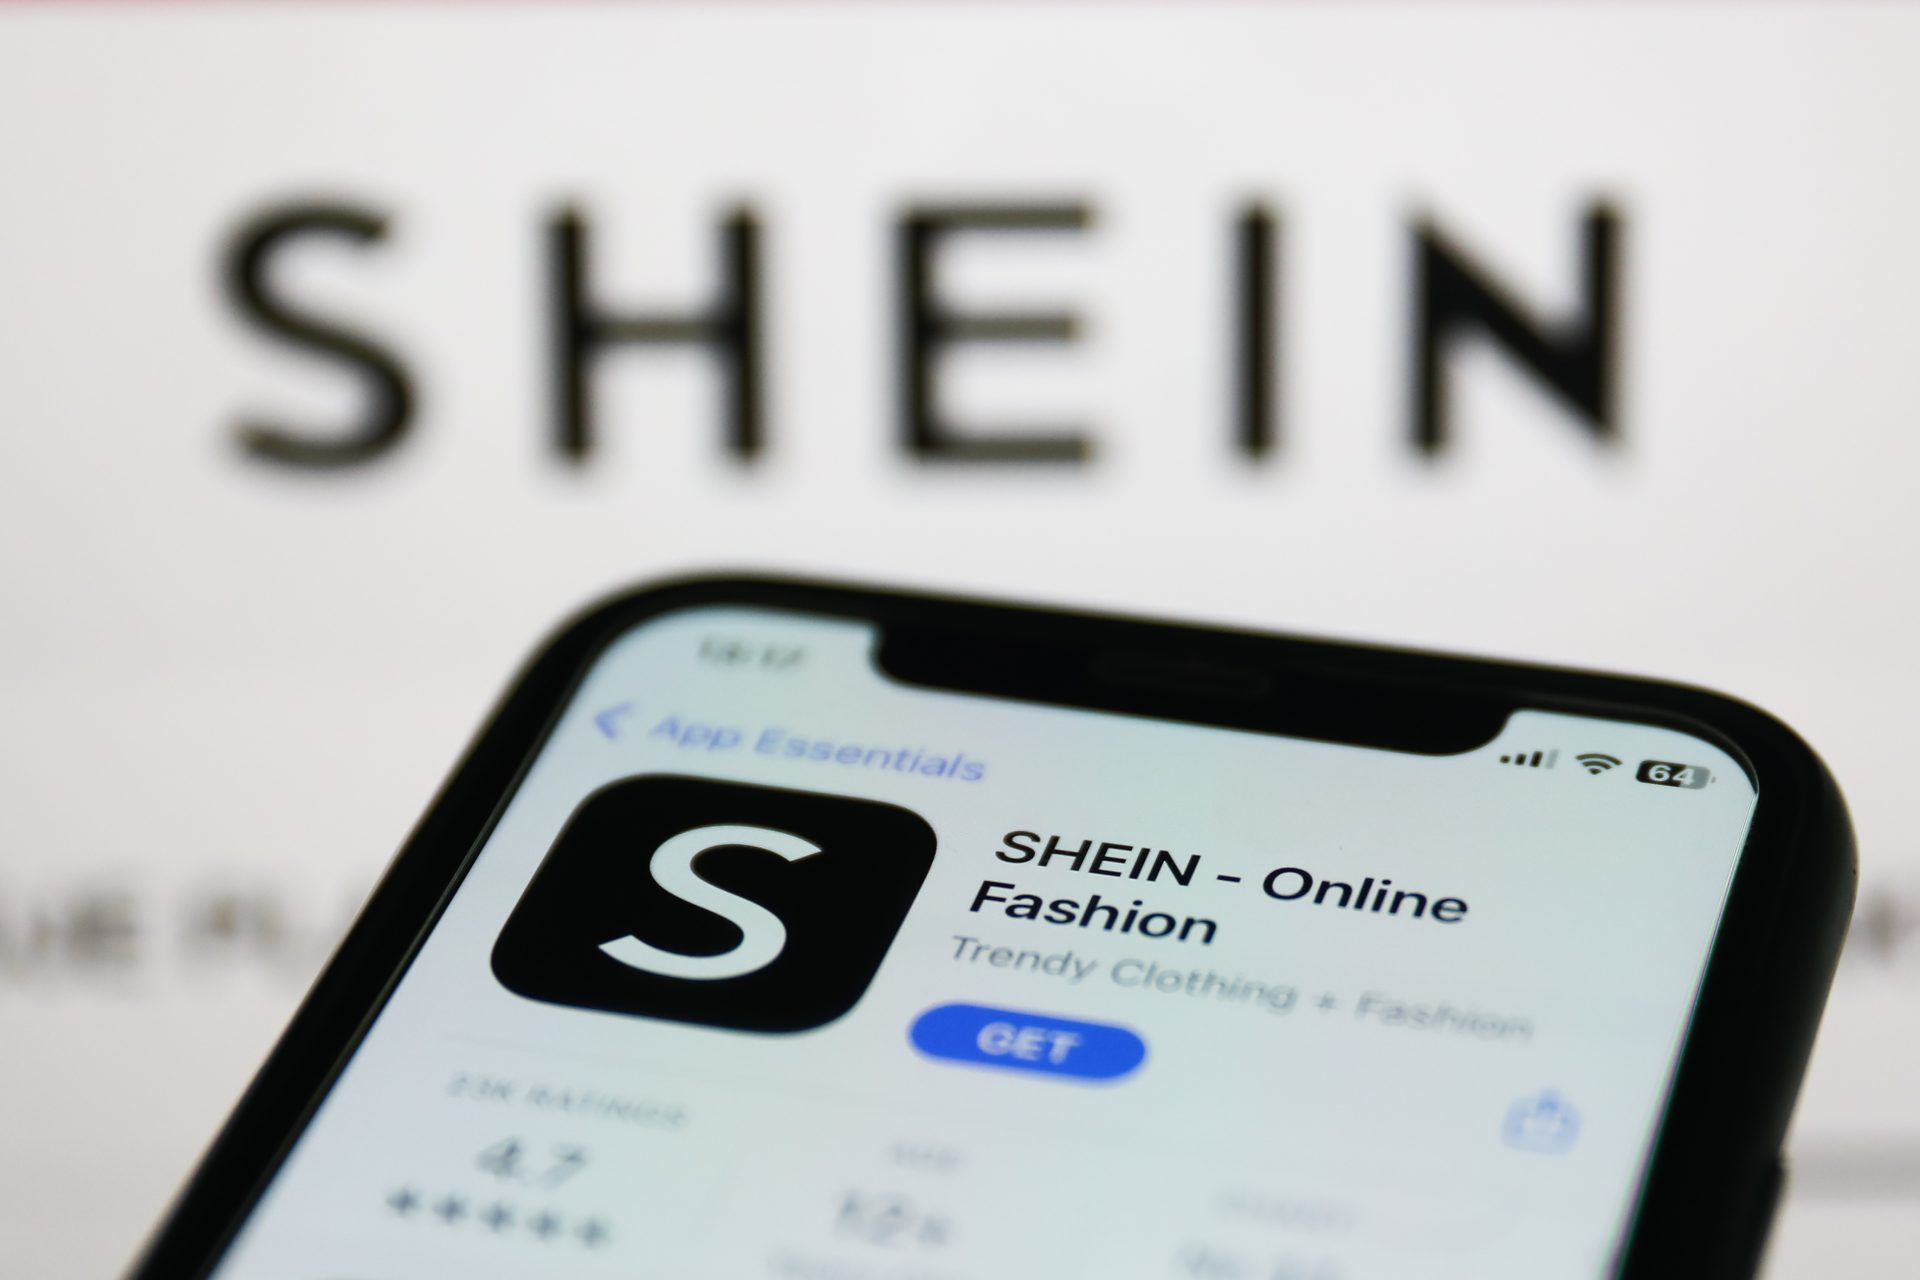 SHEIN Named In RICO 'Racketeering' & 'Copyright Infringement' Lawsuit